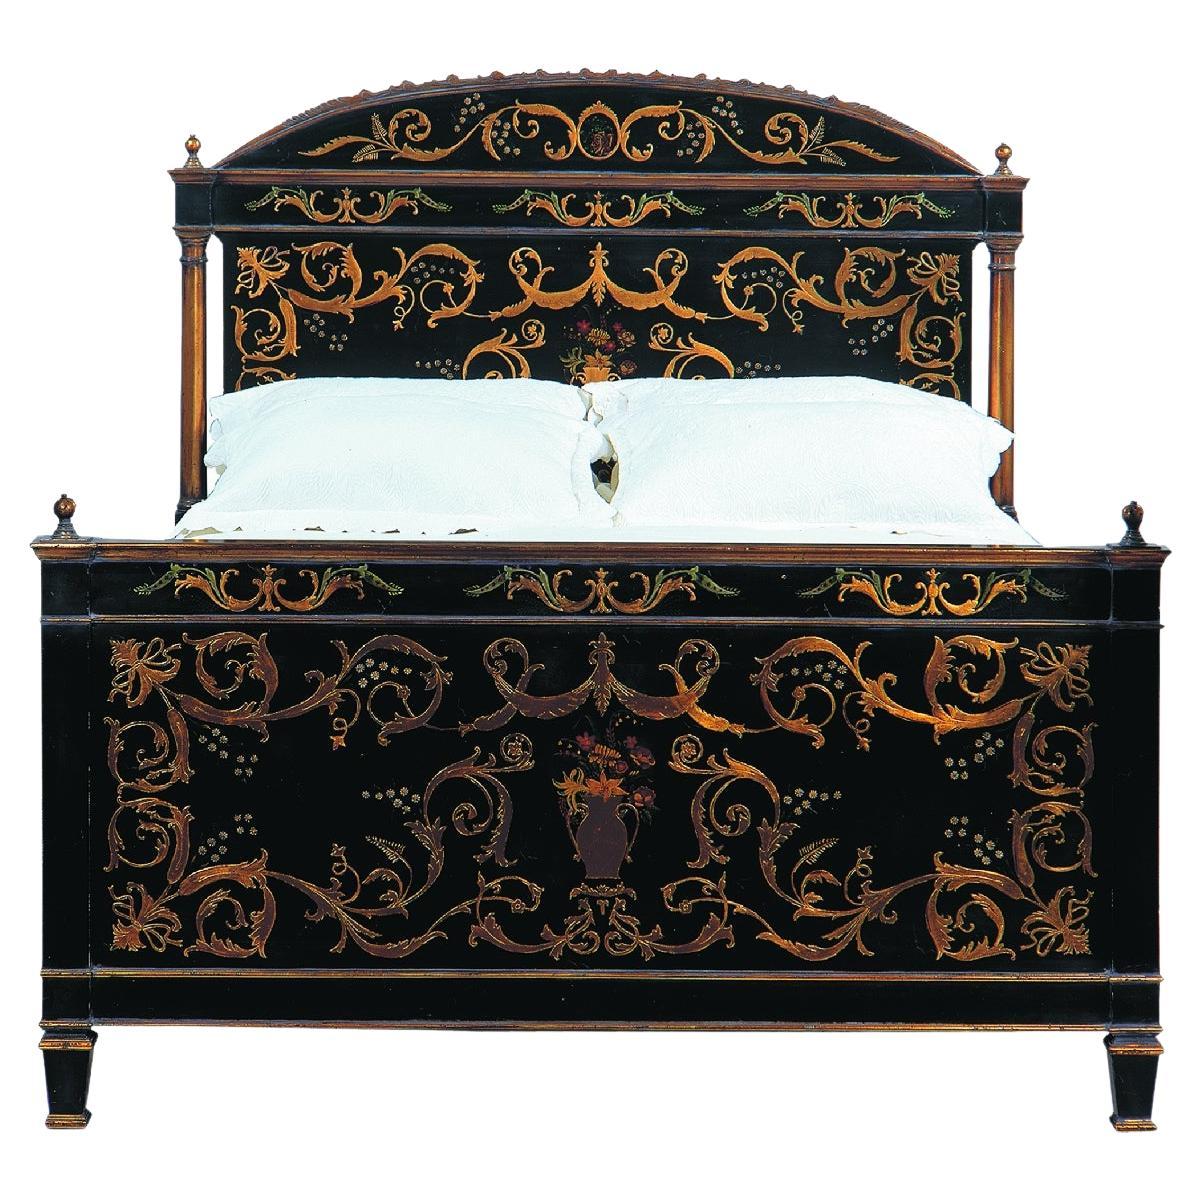 French with Italian Influence Style Hand-Painted Flandes Bed '60'